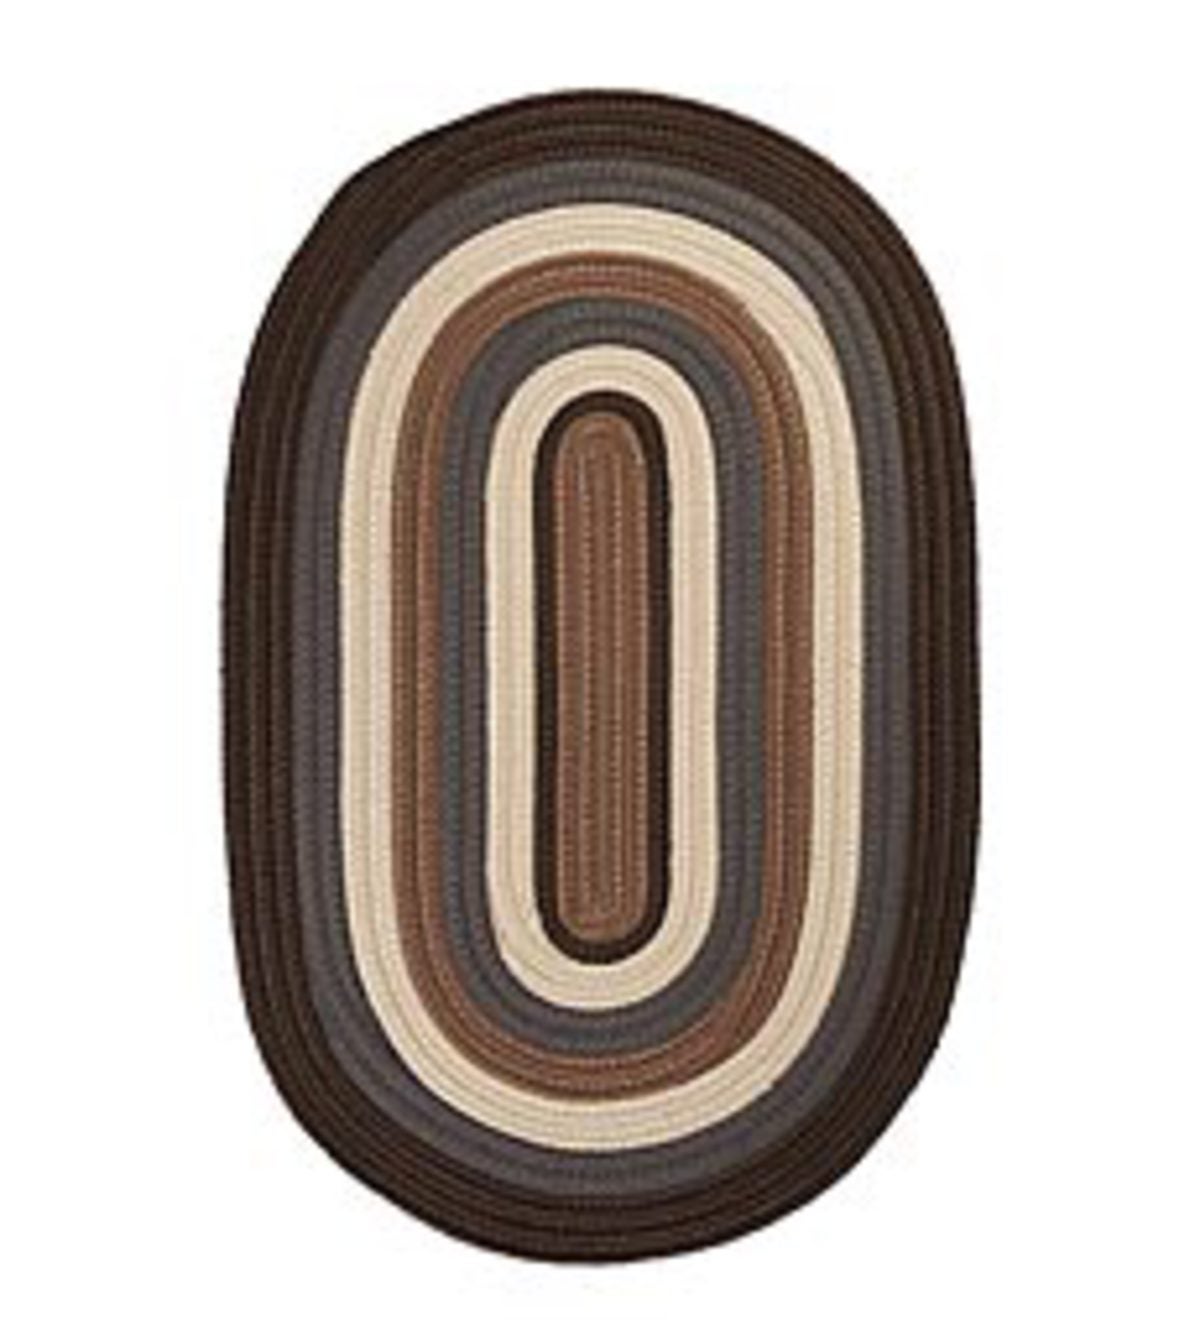 3' x 5' Banded Braided Indoor/Outdoor Rug - Brown